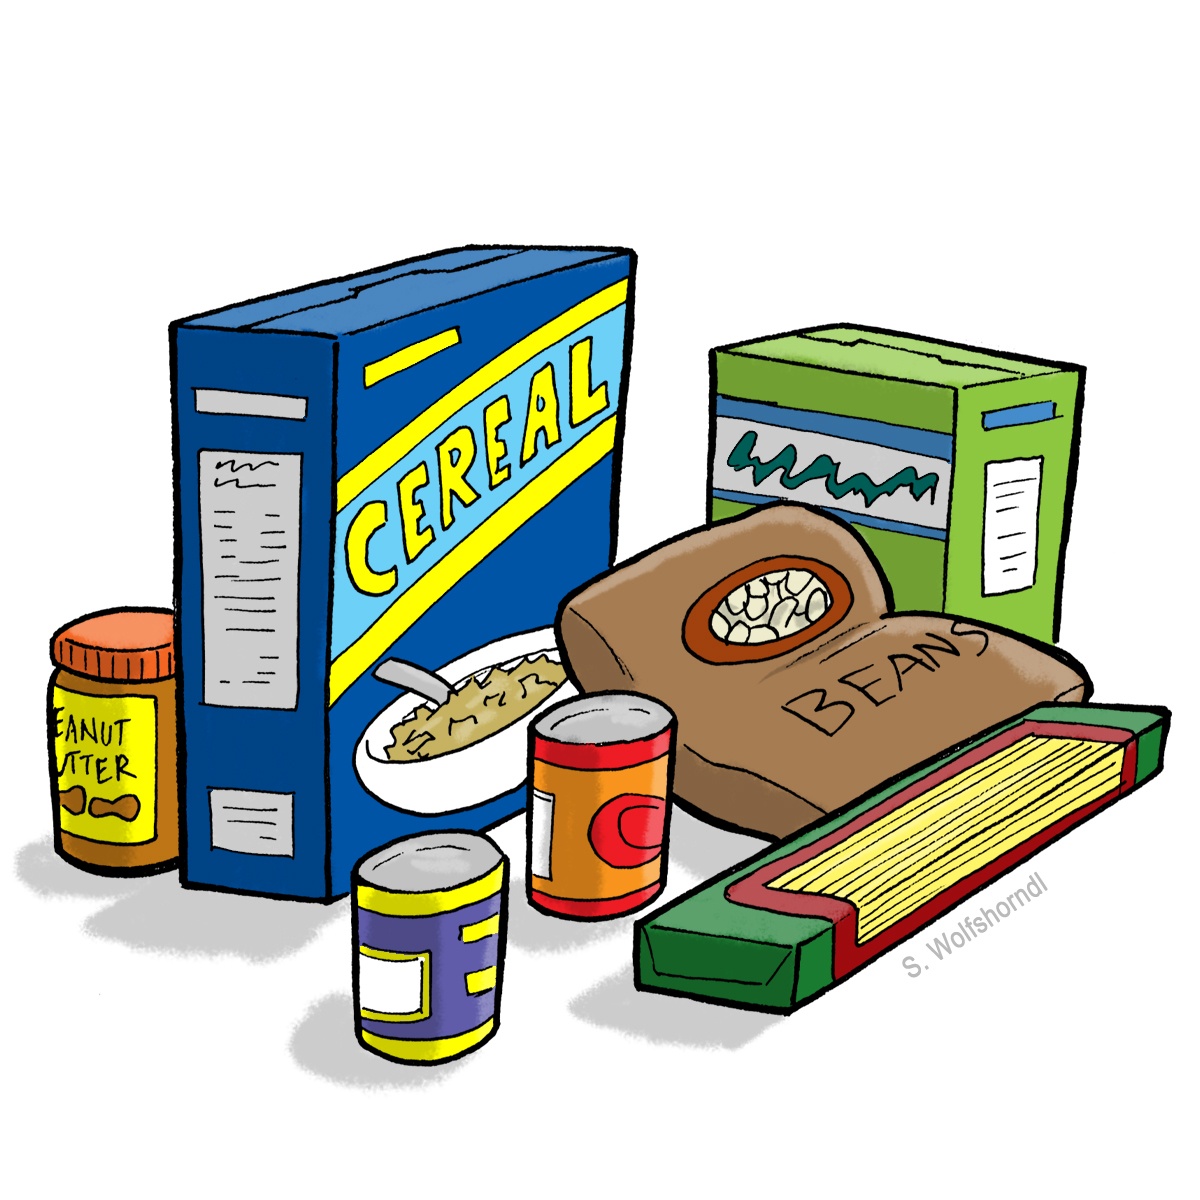 445 Canned Food free clipart.